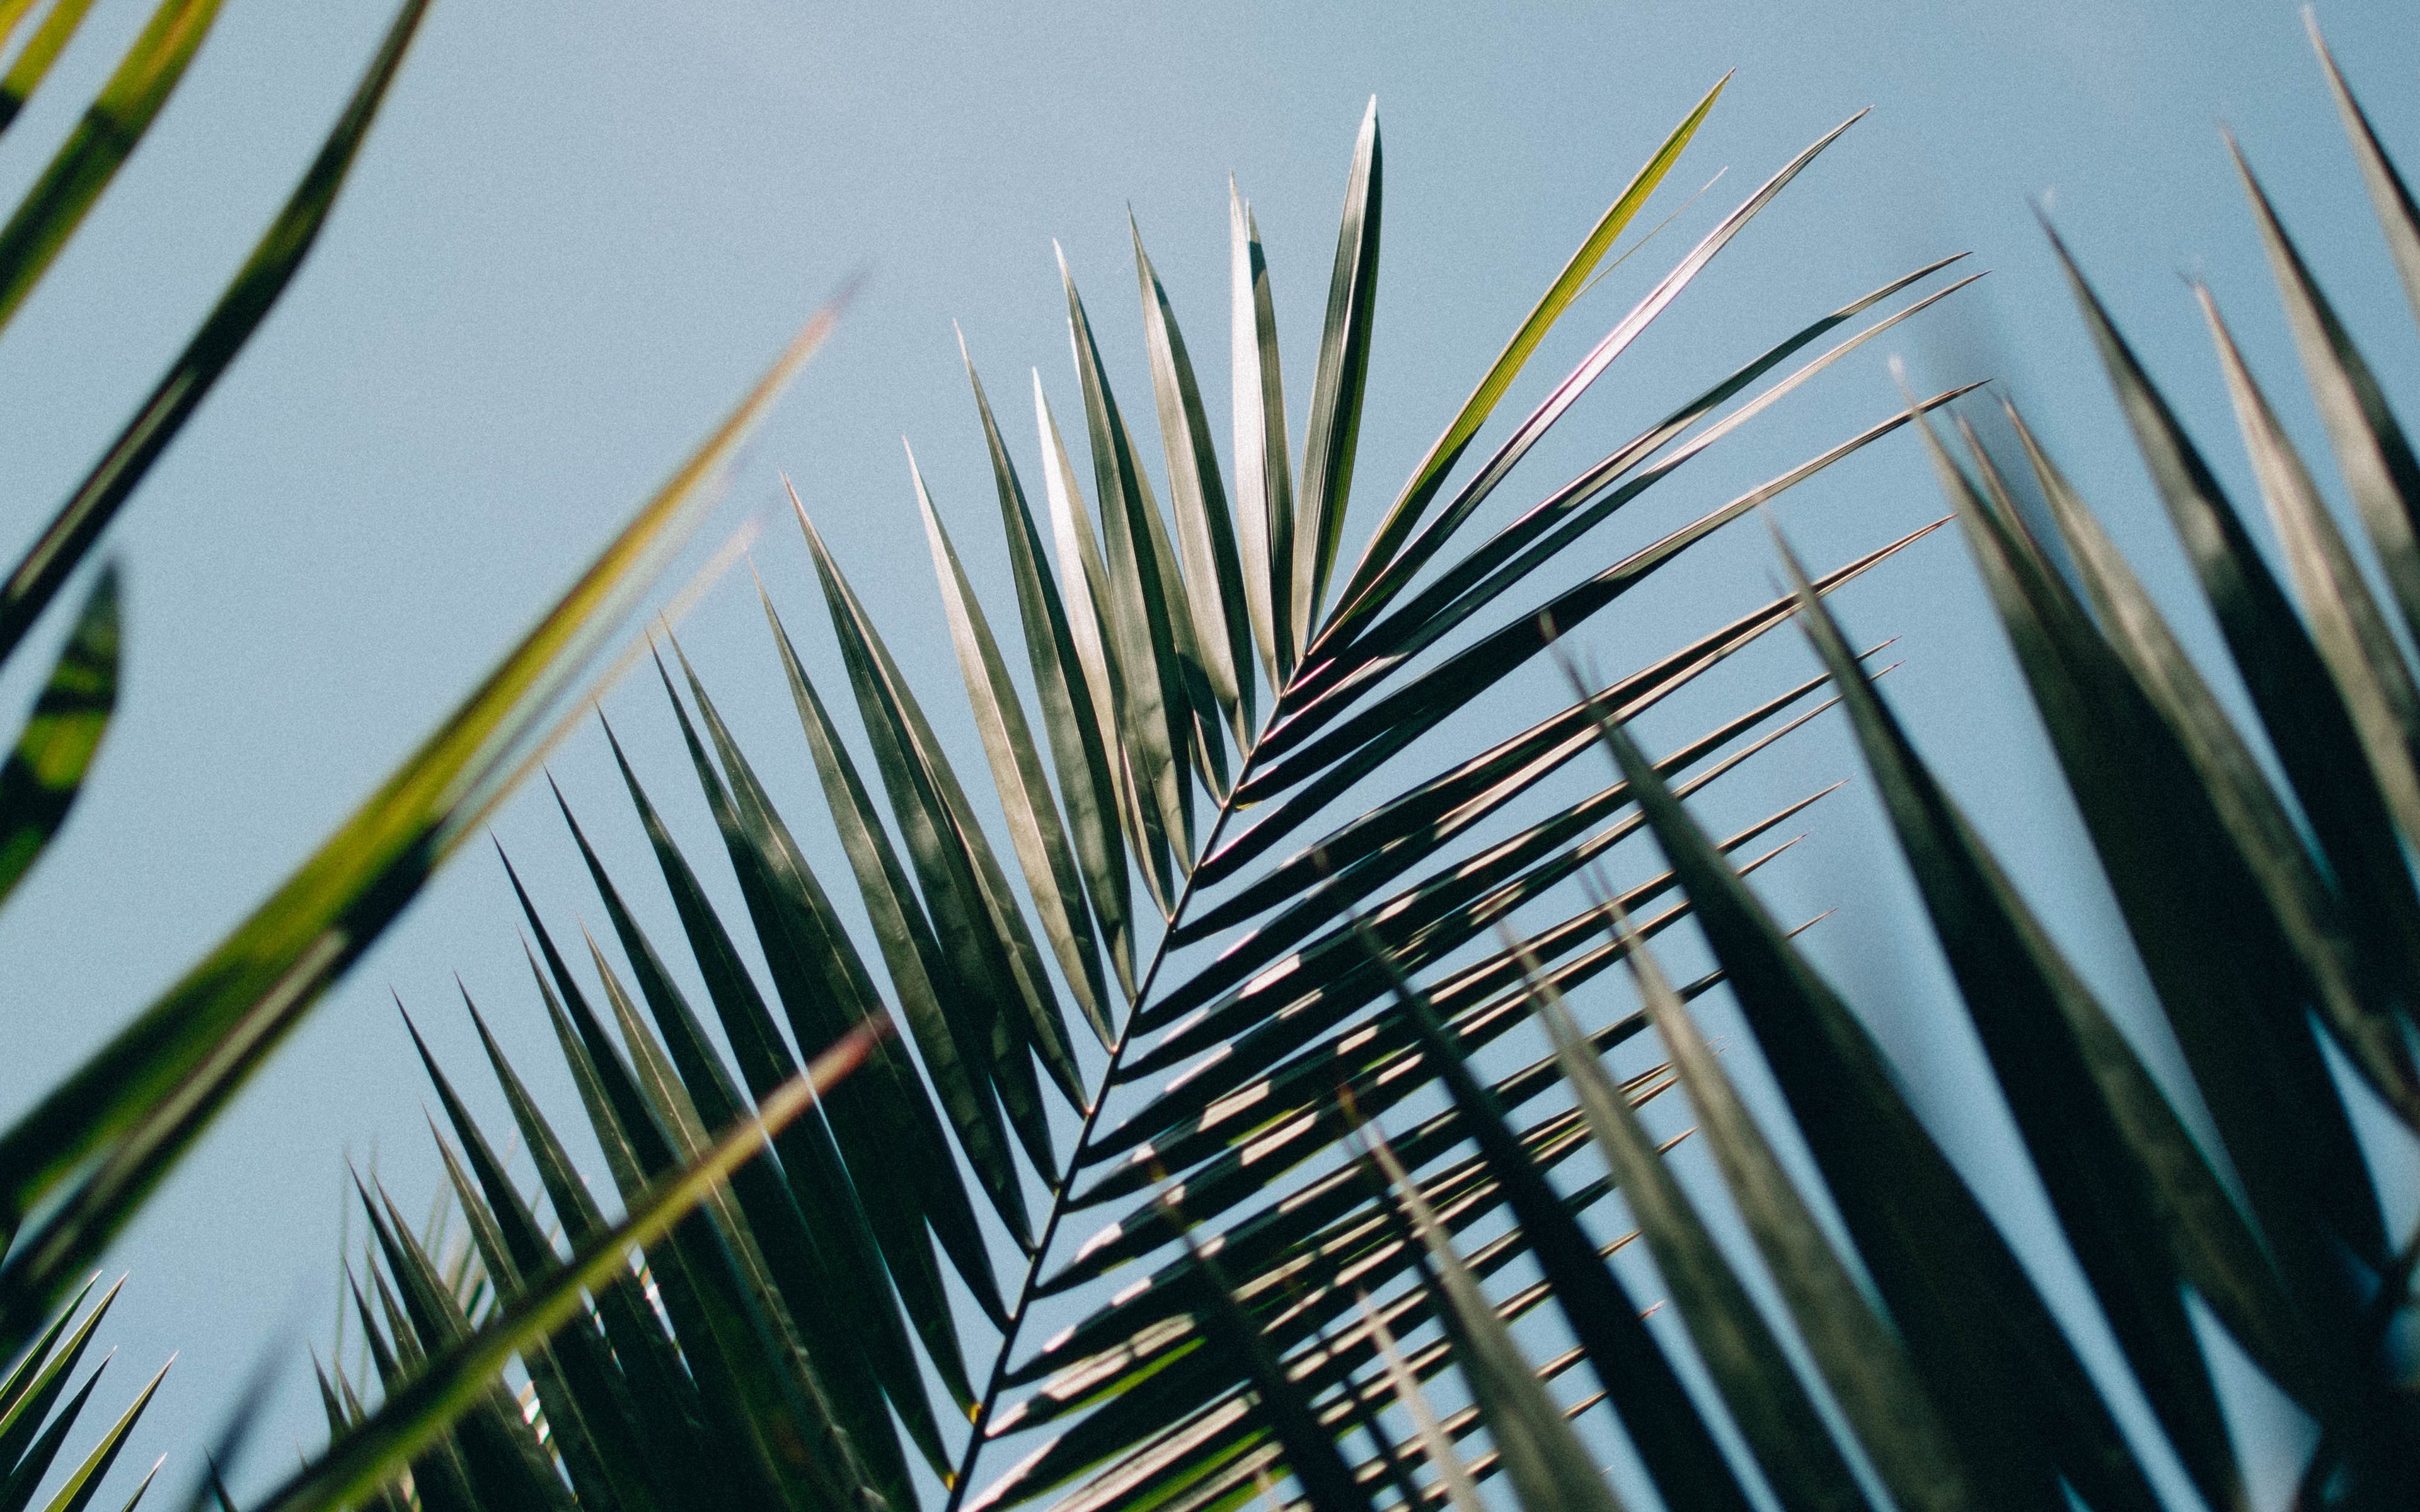 Download wallpaper 3840x2400 palm, leaves, branches, plant, green 4k ...